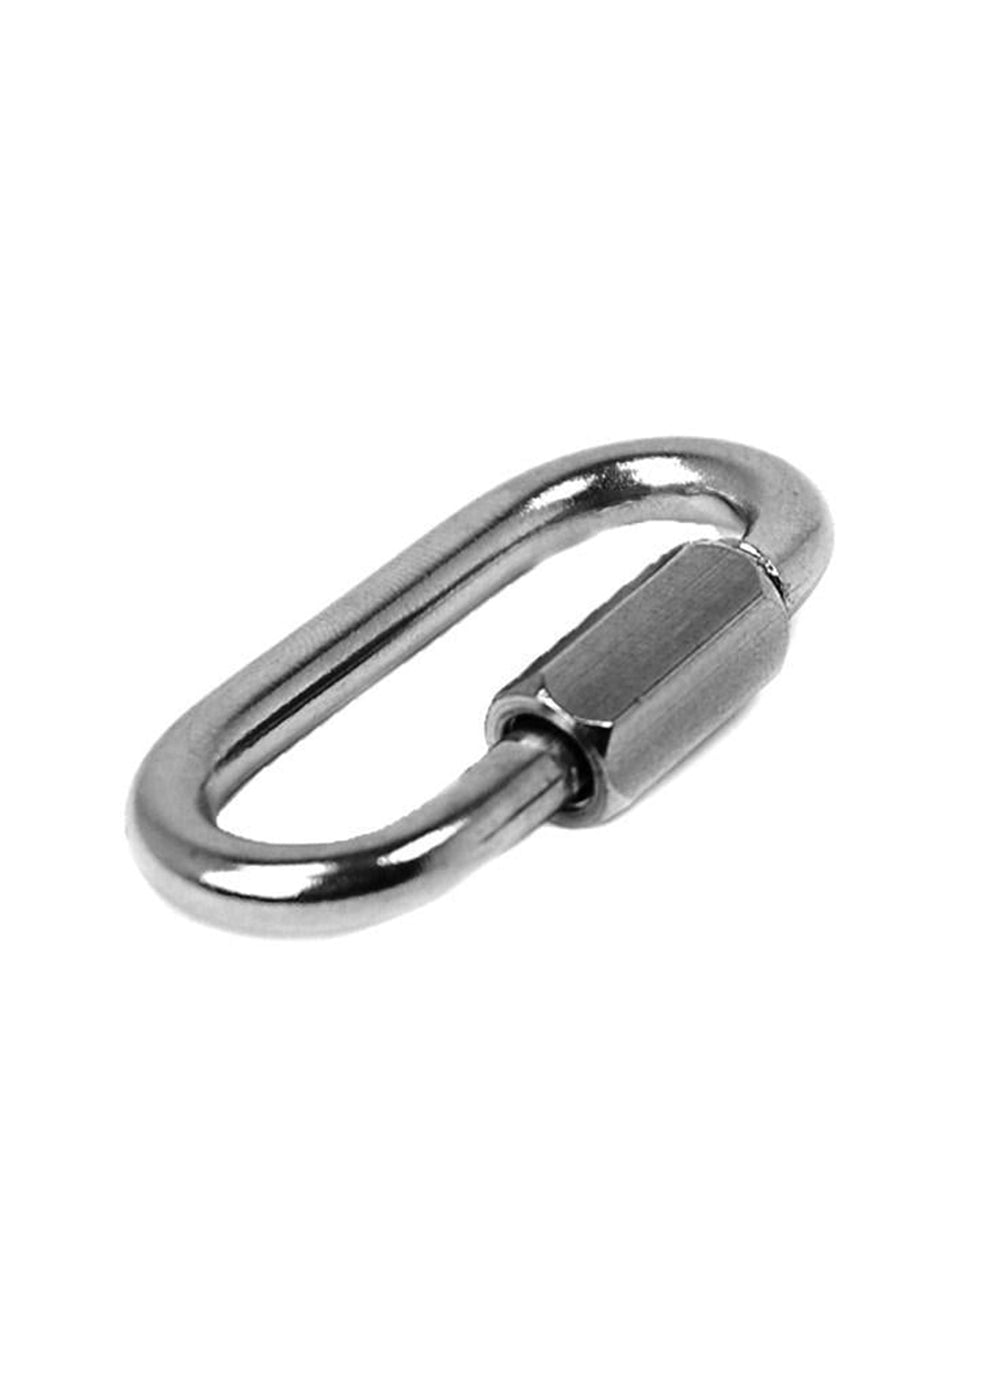 Problue Stainless Steel Quick Link Small